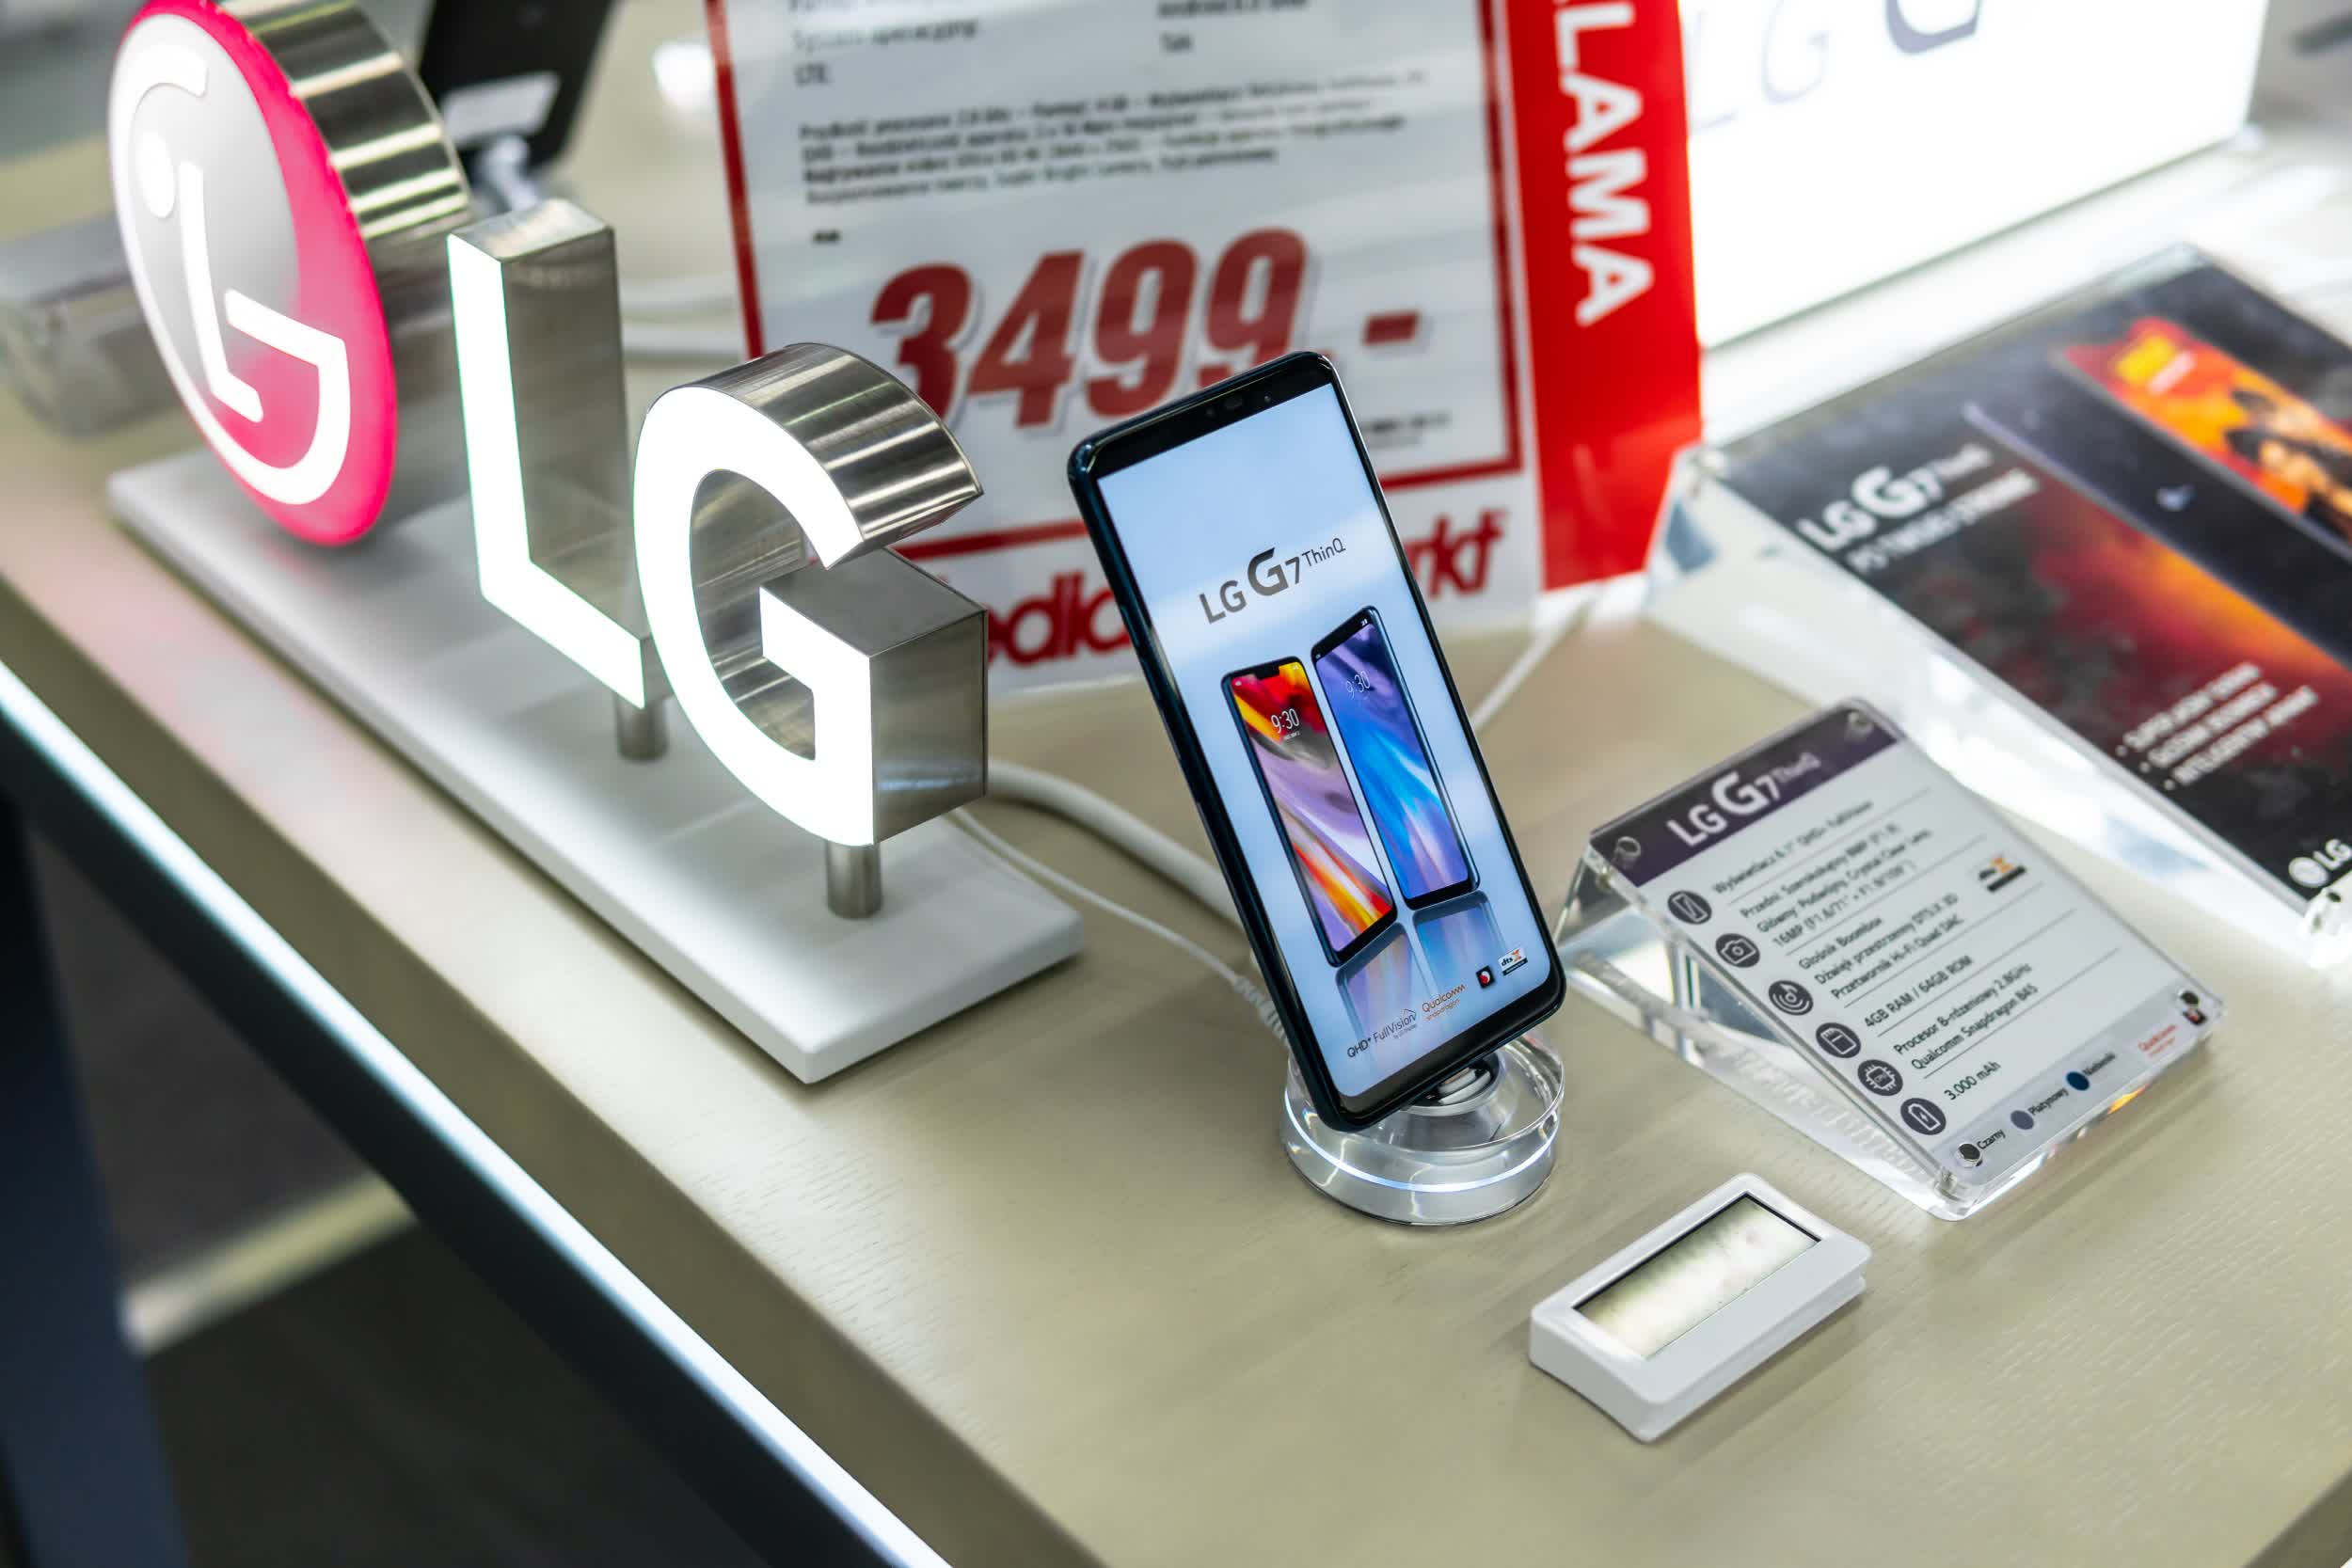 LG announces exit from the phone business